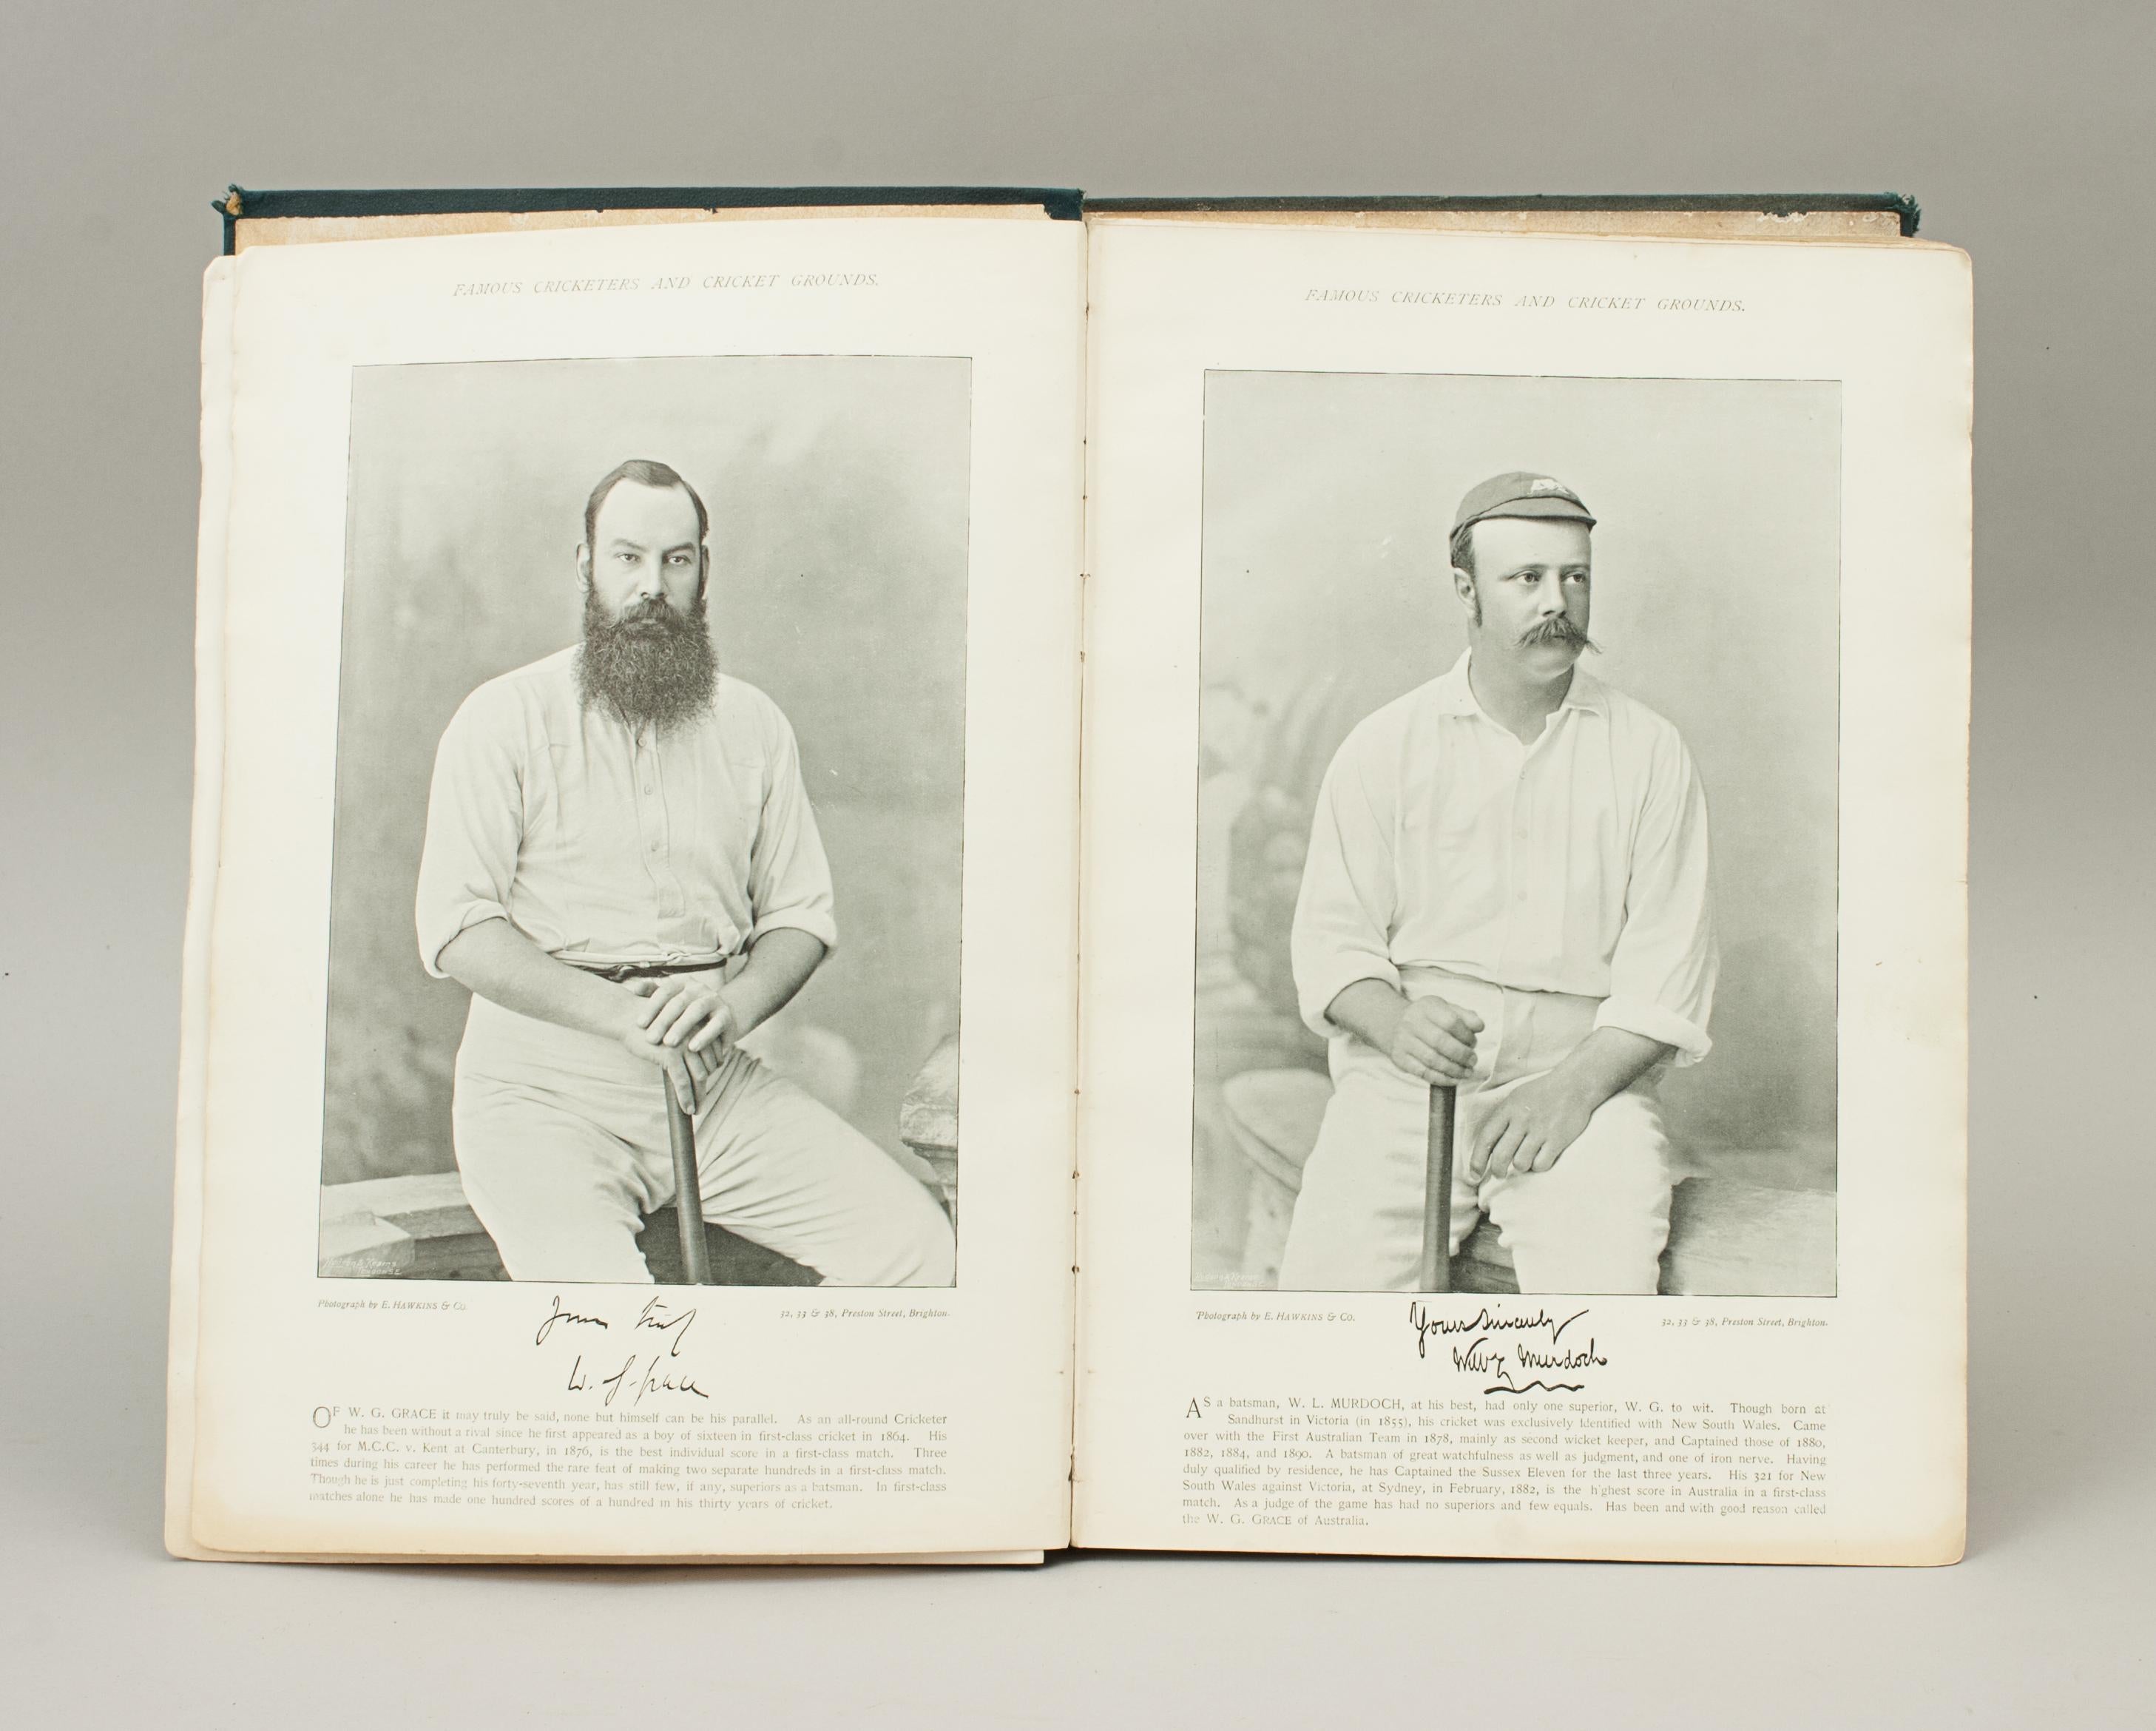 Sporting Art Cricket Book, Famous Cricketers and Cricket Grounds, 1895